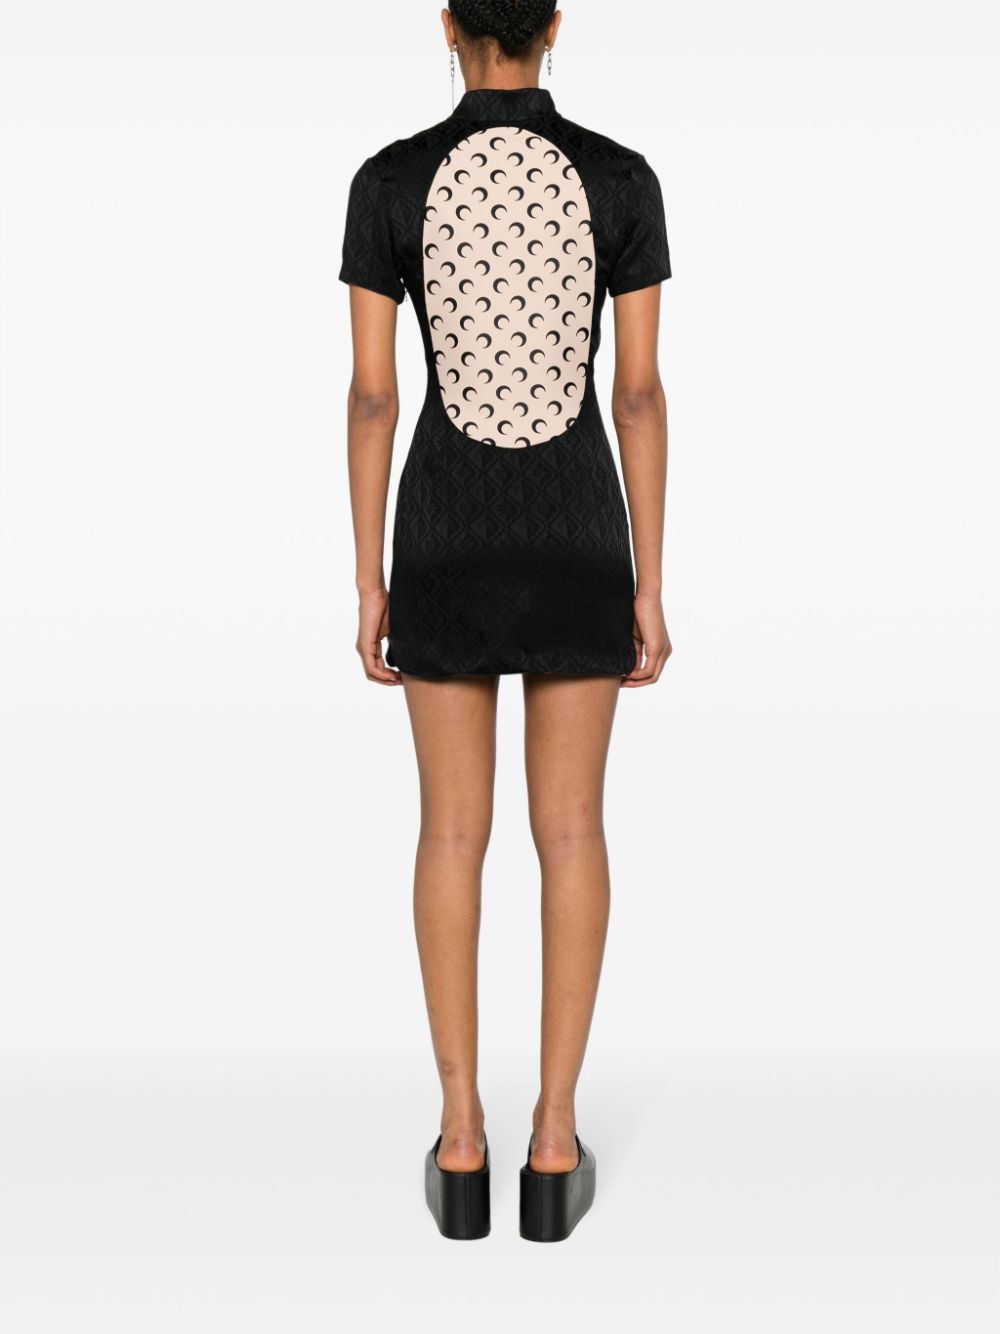 MARINE SERRE Black Jacquard Short Dress with Asymmetric Button Fastening and Contrasting Panel Detail